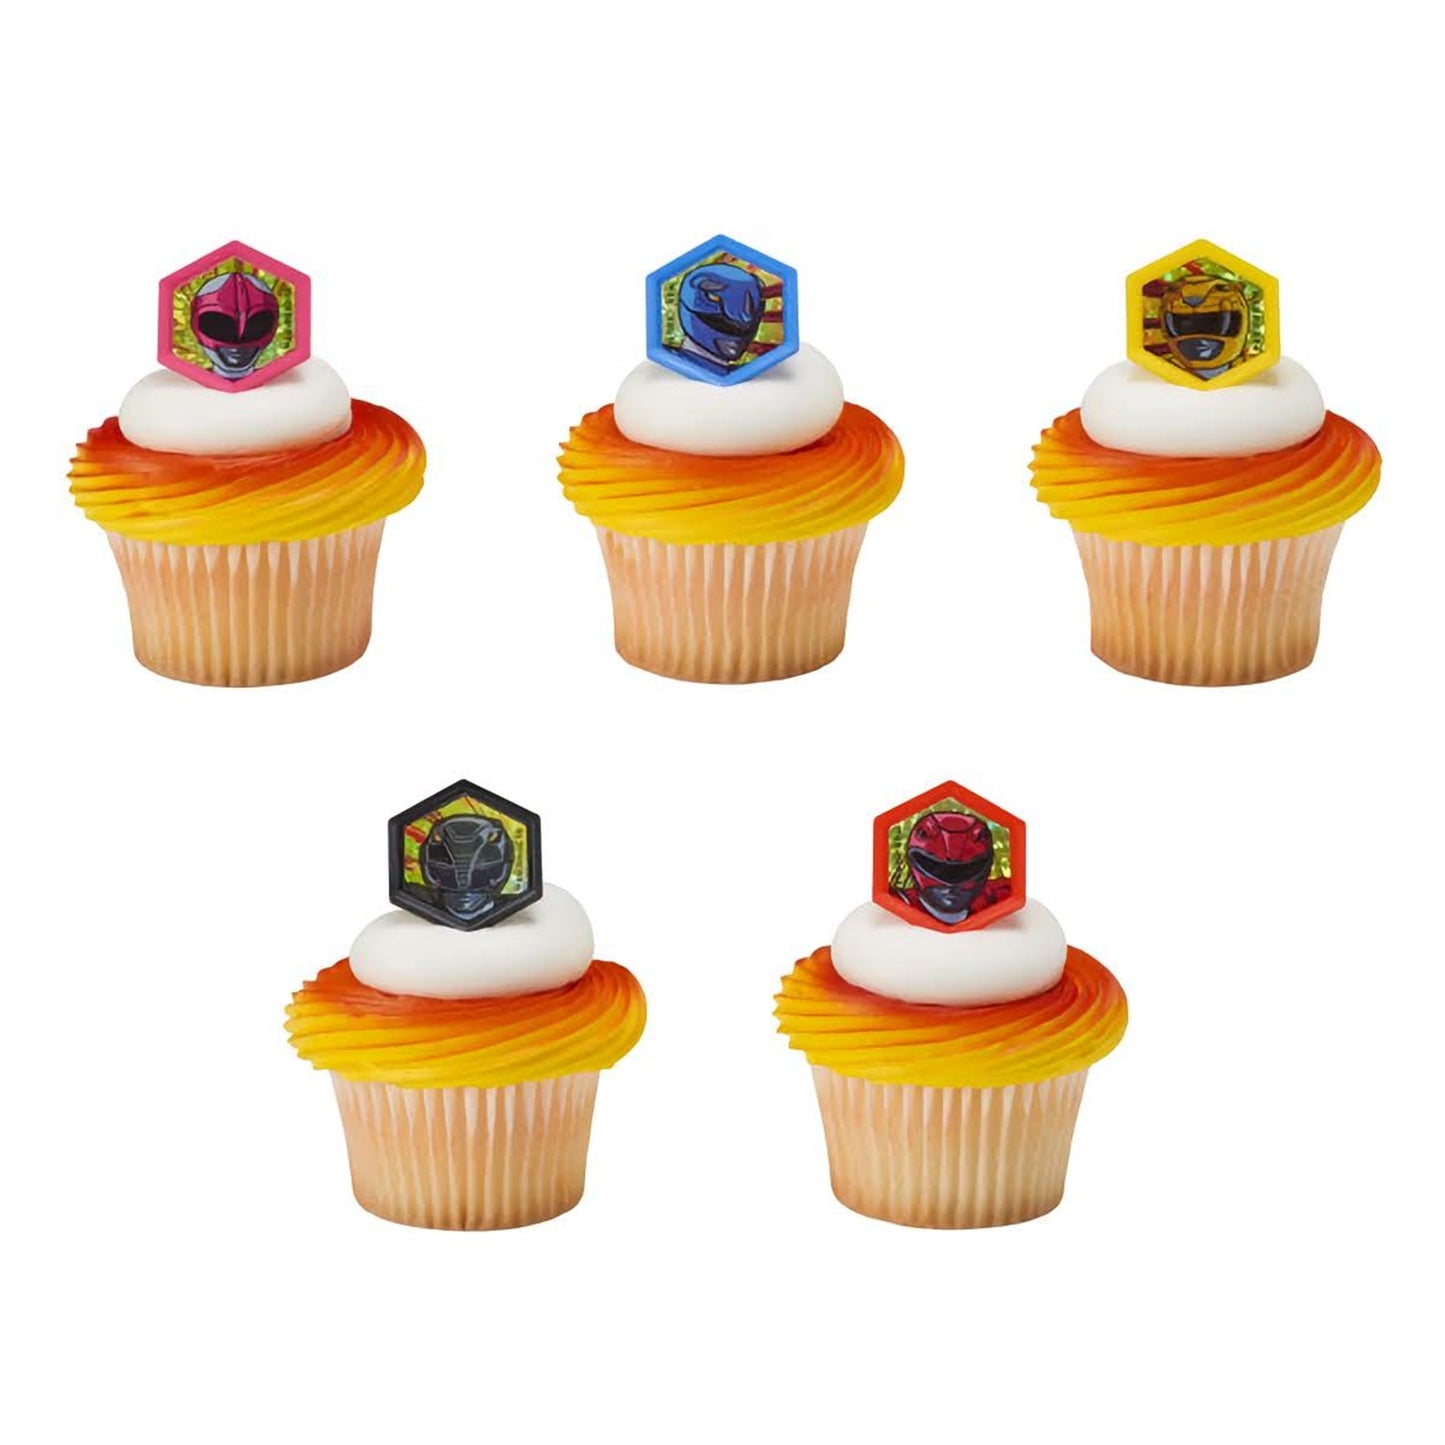 Cupcakes transformed into a team of Power Rangers with character toppers, set against a fiery backdrop of yellow and orange icing, perfect for action-packed parties or celebrating classic superhero teams.